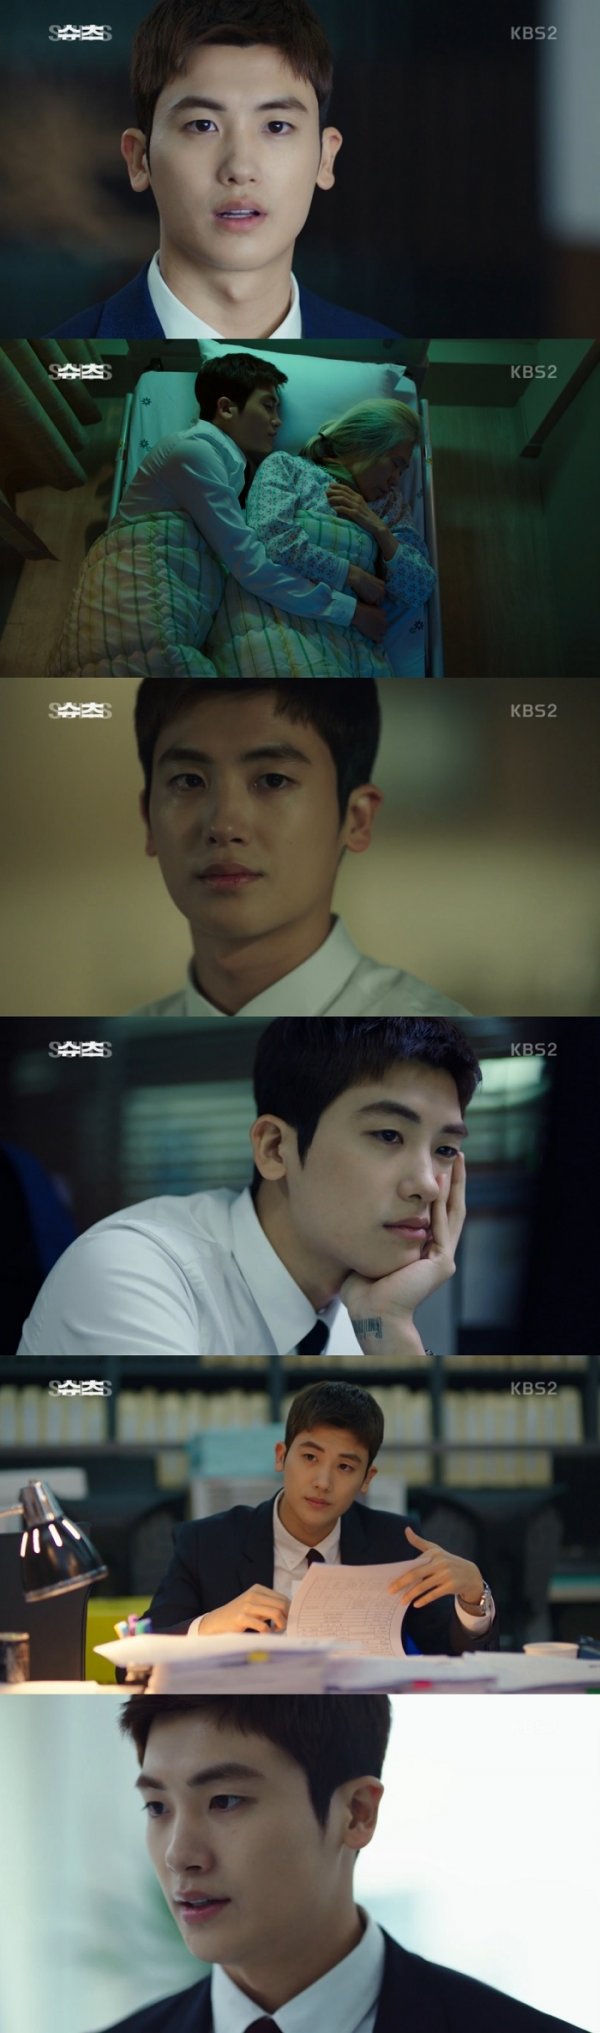 Park Hyung-sik, a fake lawyer for Suits, wants to cheer him up. Since childhood, a lawyer has dreamed and has the ability to be, but the world has never given him a chance.There was a chance for him to be a miracle.Actor Park Hyung-sik plays the role of Ko Yeon-woo, a fake new lawyer, in KBS 2TVs new tree drama Suits (playplayplay by Kim Jung-min/directed Kim Jin-woo/produced monster union, Enter Media Pictures).Ko Yeon-woo is a man with a genius memory that he never forgets when he sees and understands once, and a empathy ability to disarm his opponent.The story of Suits is the story of the opportunity of a fake lawyer in front of the door of a world where he rarely opens.He is a man of two abilities that are difficult to have only one. He has the charm of stealing his eyes.It is also true that even the main character of the drama can have such a perfect and enviable character.However, Ko Yeon-woo brings the audience a consensus that they want to cheer up rather than the gap of different from me. In the second episode of Suits broadcast on April 26, the special aspect of such a character, Park Hyung-sik, came into contact with more intensely.On this day, Ko Yeon-woo made his first commute as a fake new lawyer.As soon as he first came to work, he received a dismissal notice, but he survived the best law firm in Korea again due to the desperation of standing at the edge of the cliff. After that, Ko Yeon-woo was not a real lawyer, but he solved the situations given in his own way.He listened to his clients story and succeeded in wiggling and using the situation cleverly.The appearance of Ko Yeon-woo, who had nothing in his condition for the title of lawyer, was awkward but faced with the problem and solved it, giving viewers a thrilling pleasure and surrogate satisfaction. Park Hyung-sik is melting in Suits, containing both parts of the character, such as brightness, darkness, sharpness and softness.When his brain flashes, the exclamation of genius comes out.On the other hand, even though he is a friend who put himself in a crisis, he can not be tough, or he visits a grandmother who is hospitalized and makes a person who sees him when he sleeps together in a narrow bed.